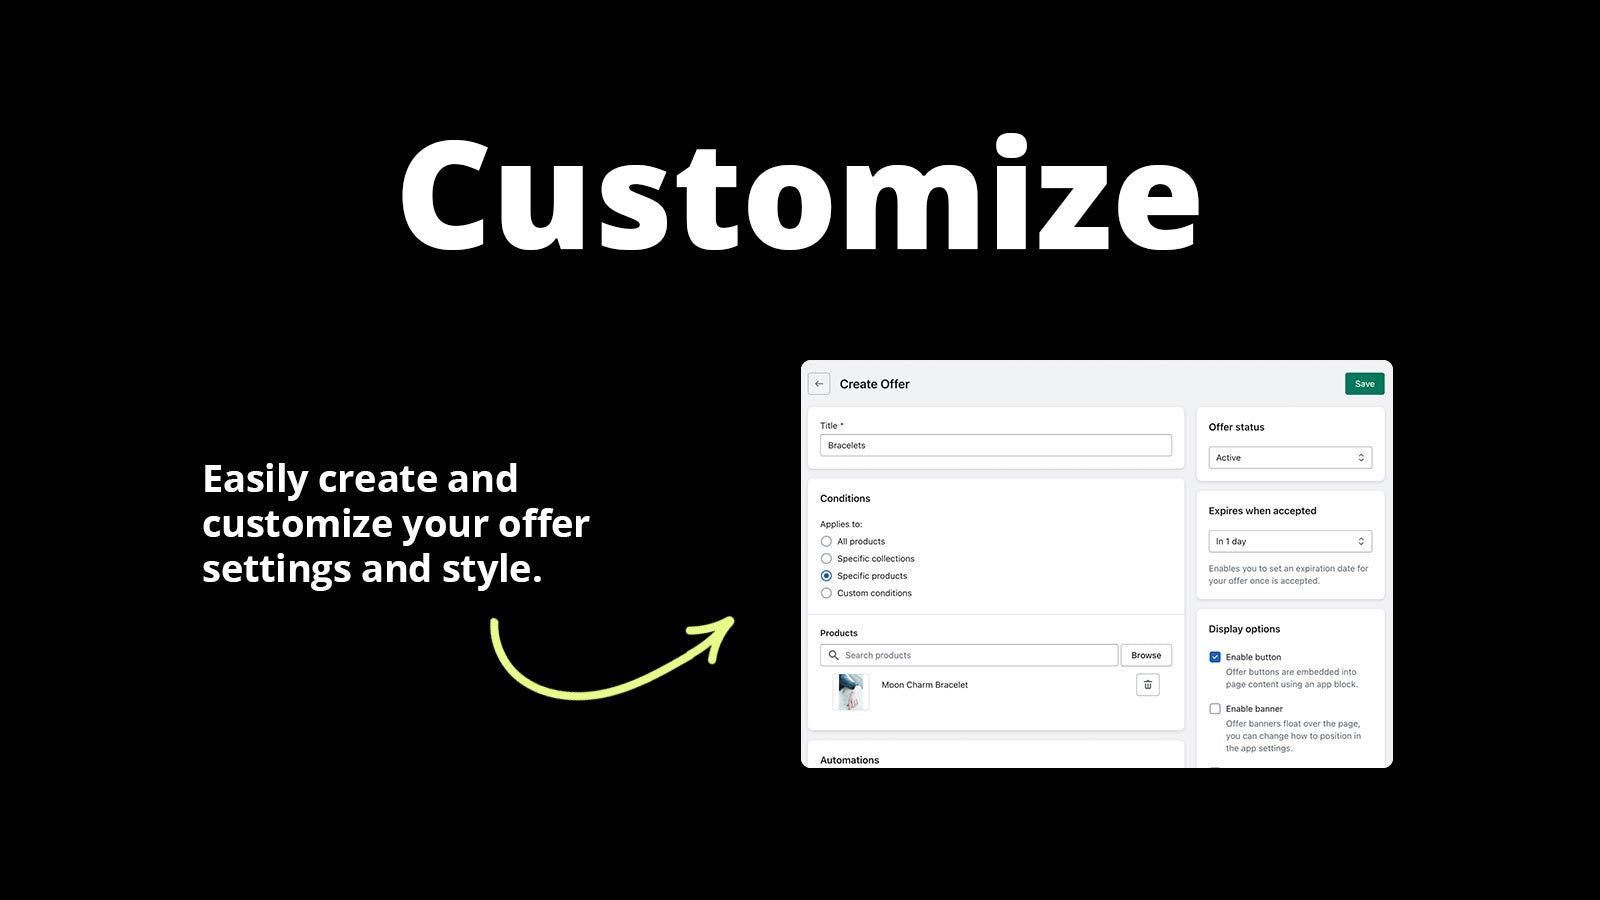 Customize - Easily create and customize offer settings and style